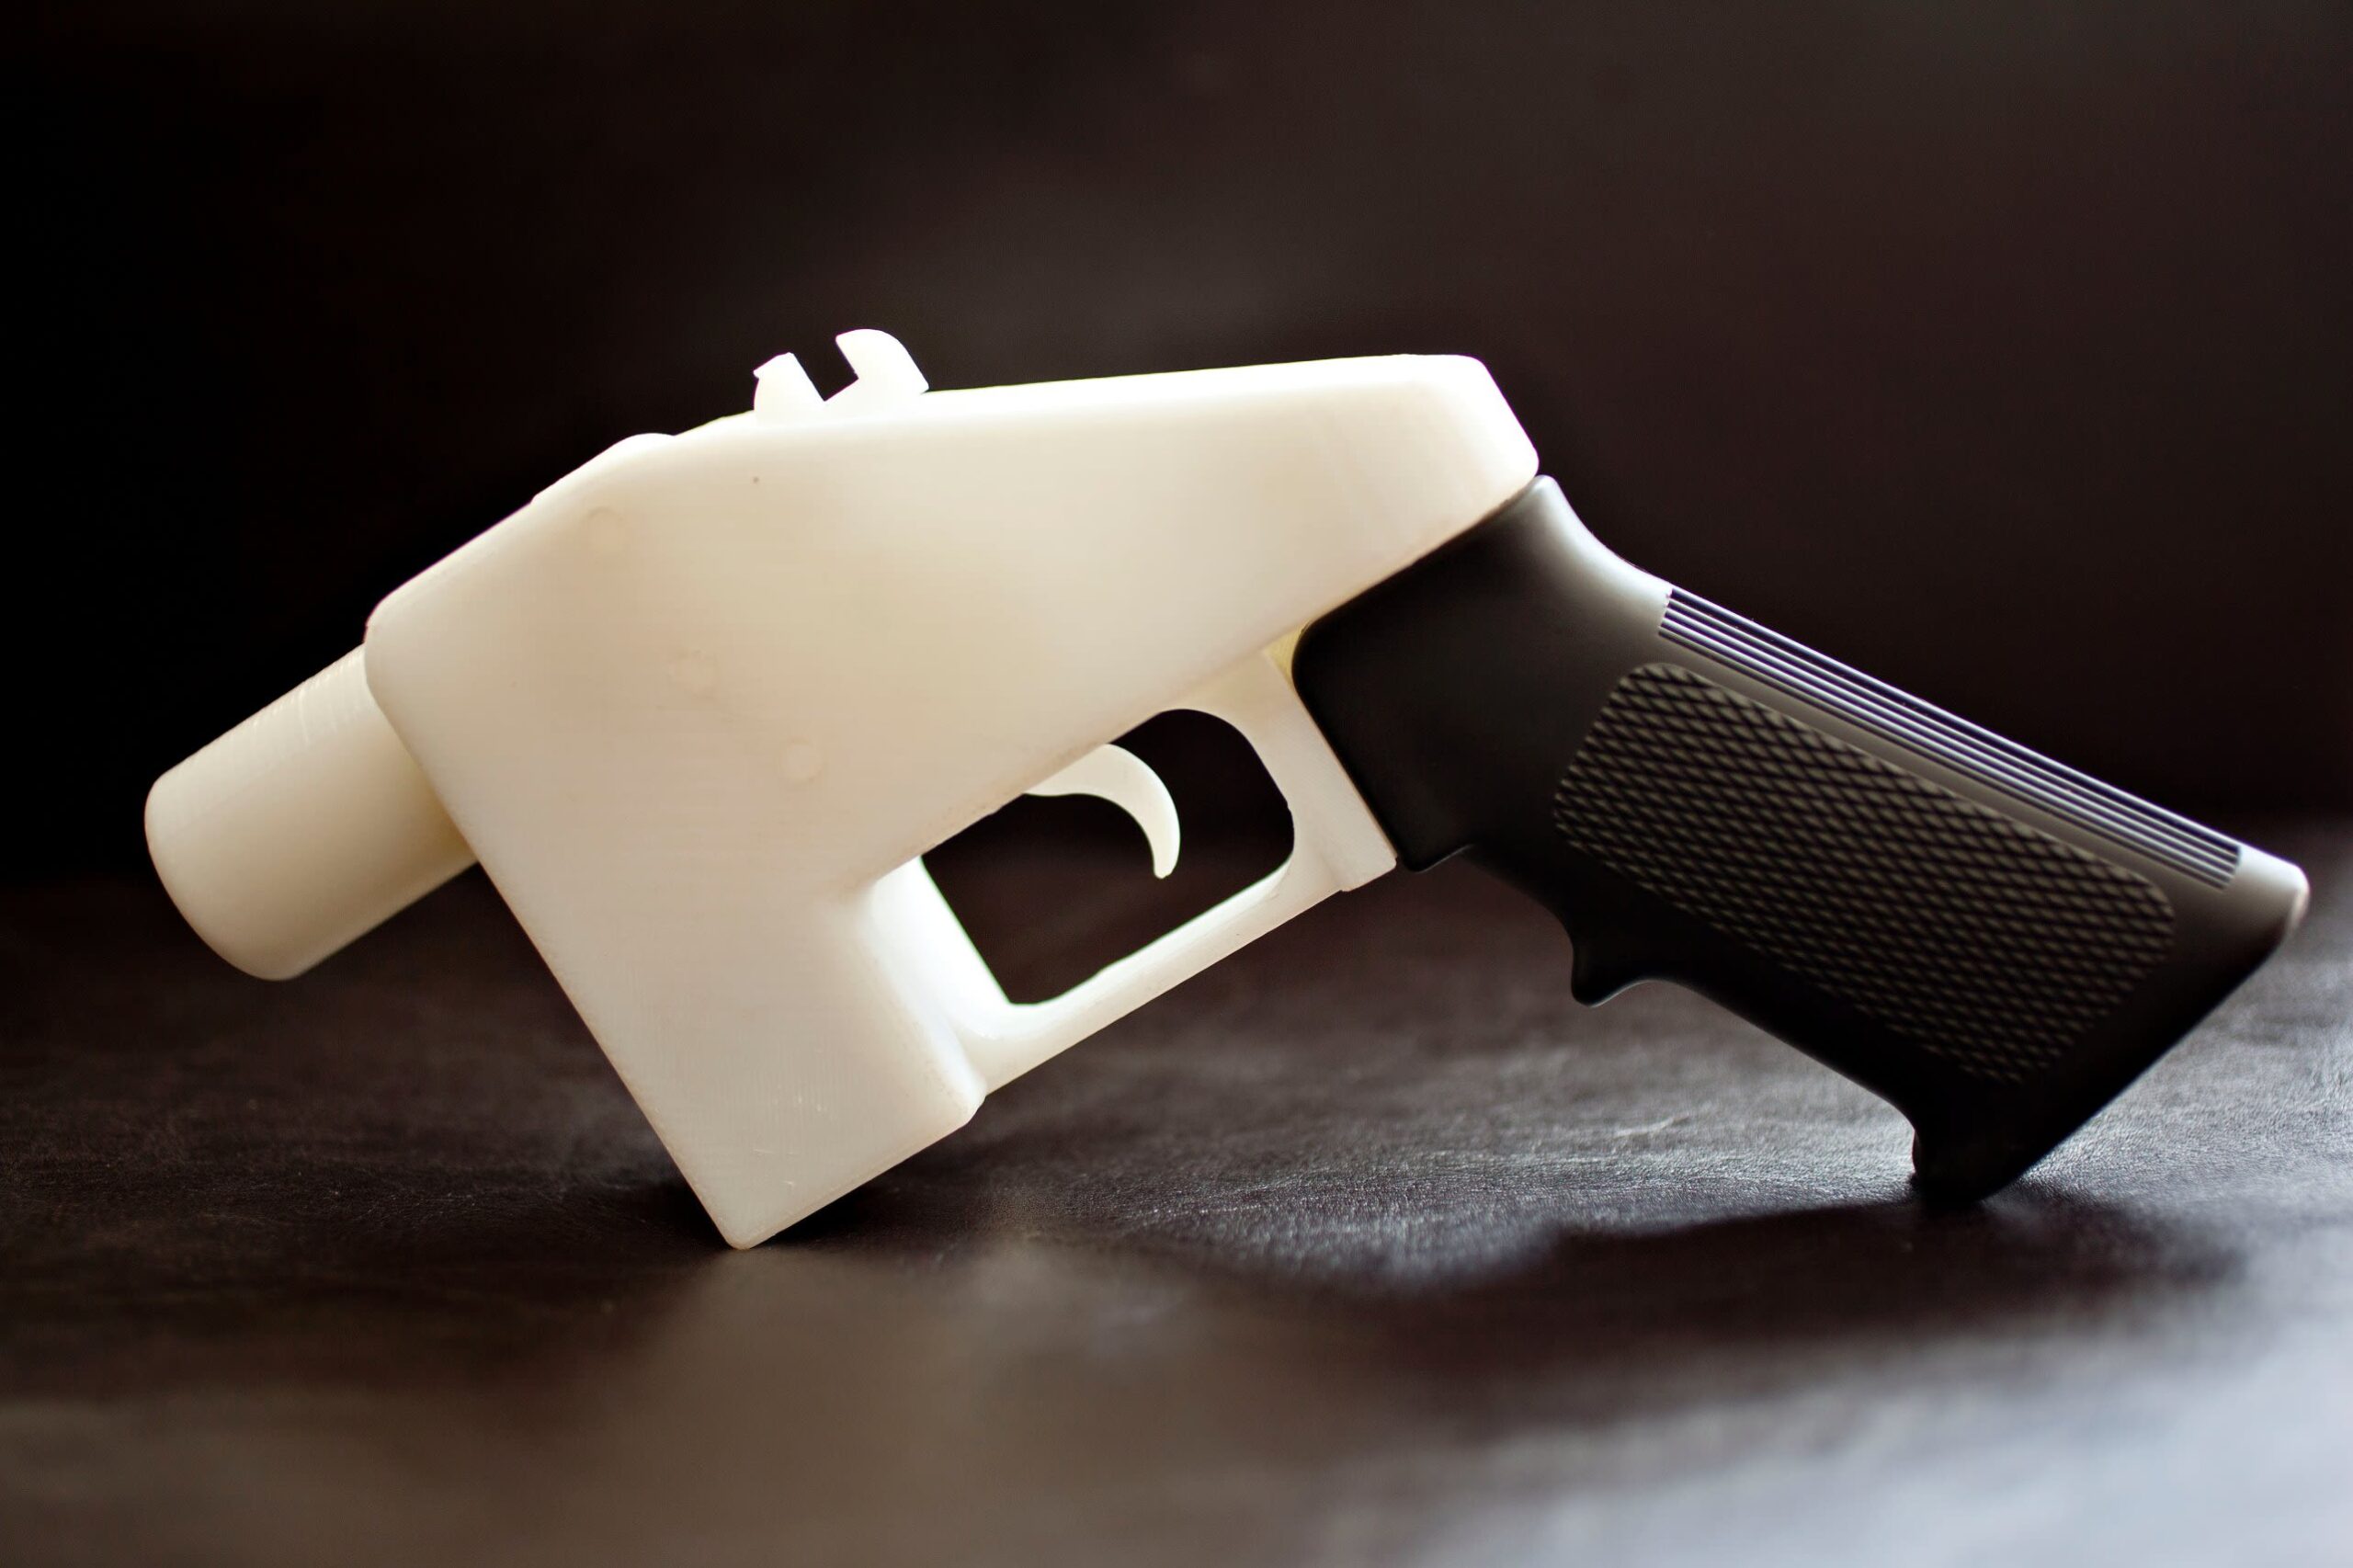 from-toy-models-to-lethal-weapons-the-controversy-of-3d-printed-guns-1-scaled From Toy Models to Lethal Weapons: The Controversy of 3D Printed Guns